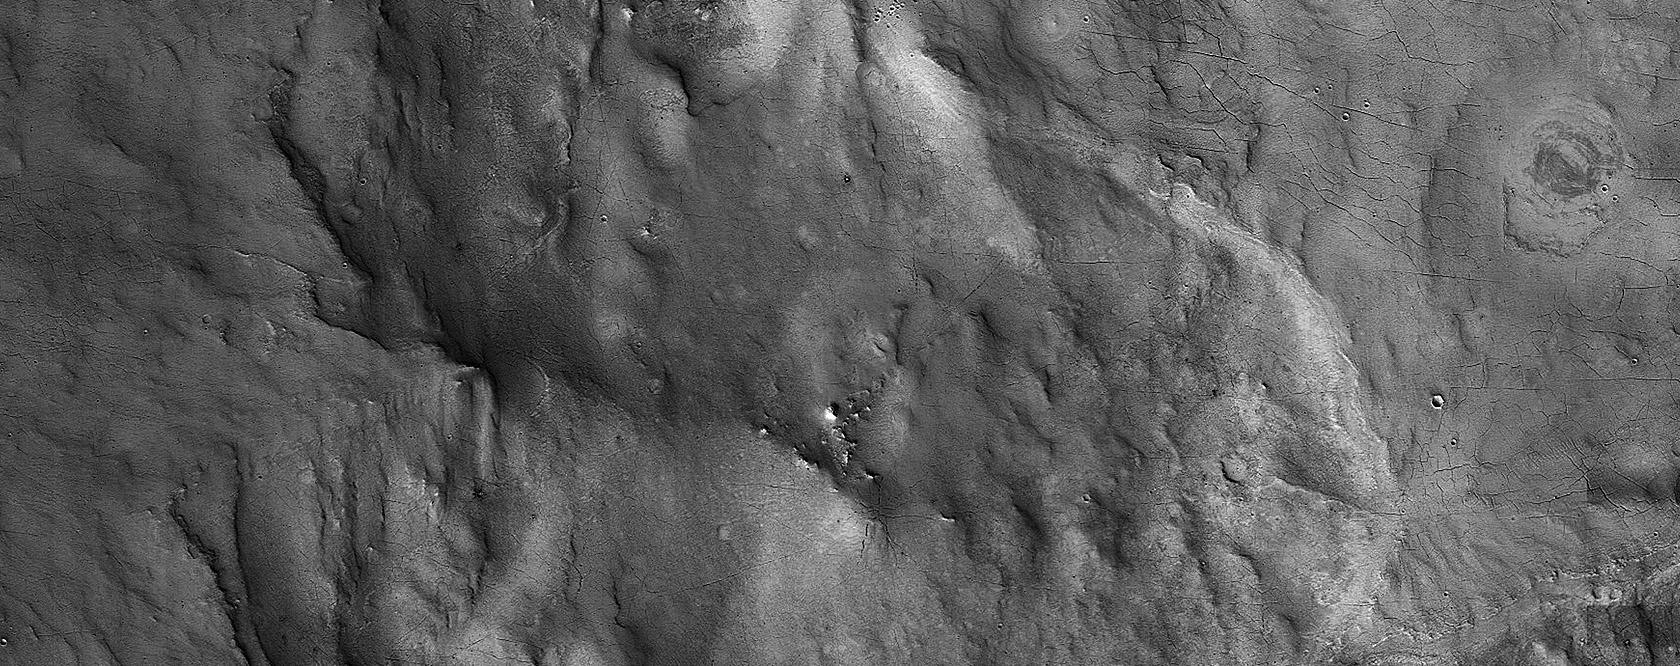 Delta-Like Structure on Western Margin of Antoniadi Crater